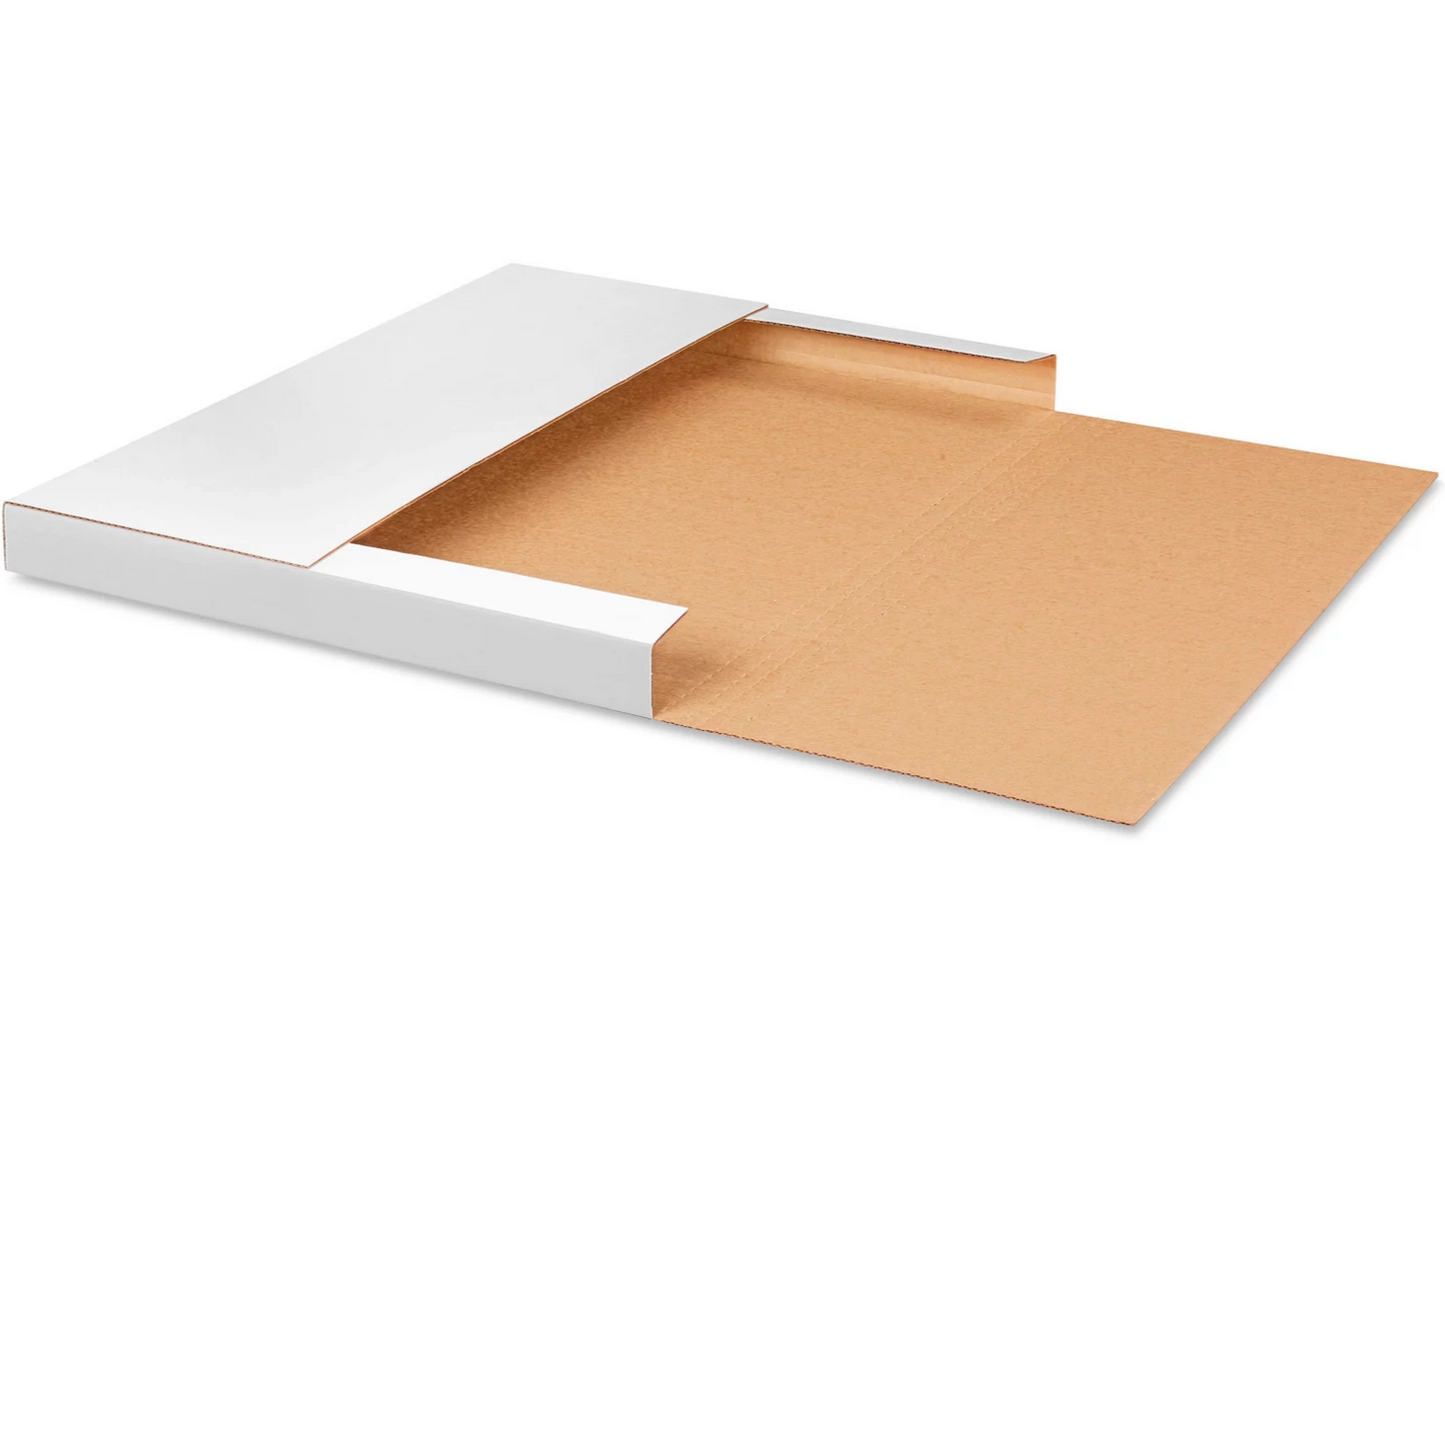 White Easy-Fold Mailers - by ULINE - K. A. Artist Shop